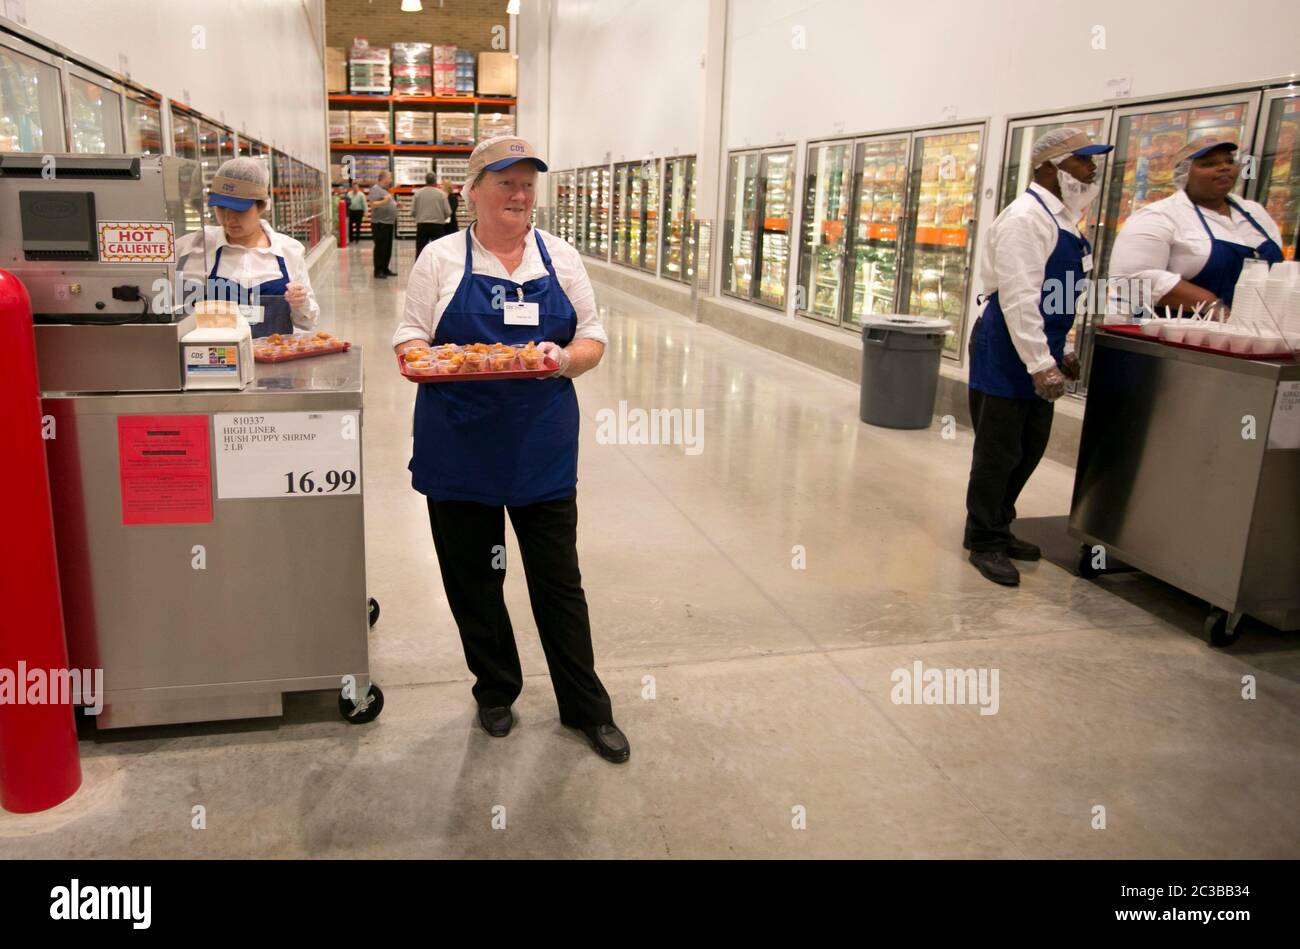 Cedar Park Texas USA, November 22 2013: Employees are ready to offer free food samples at newly opened Costco warehouse club in a fast-growing Austin suburb.   ©Marjorie Kamys Cotera/Daemmrich Photography Stock Photo